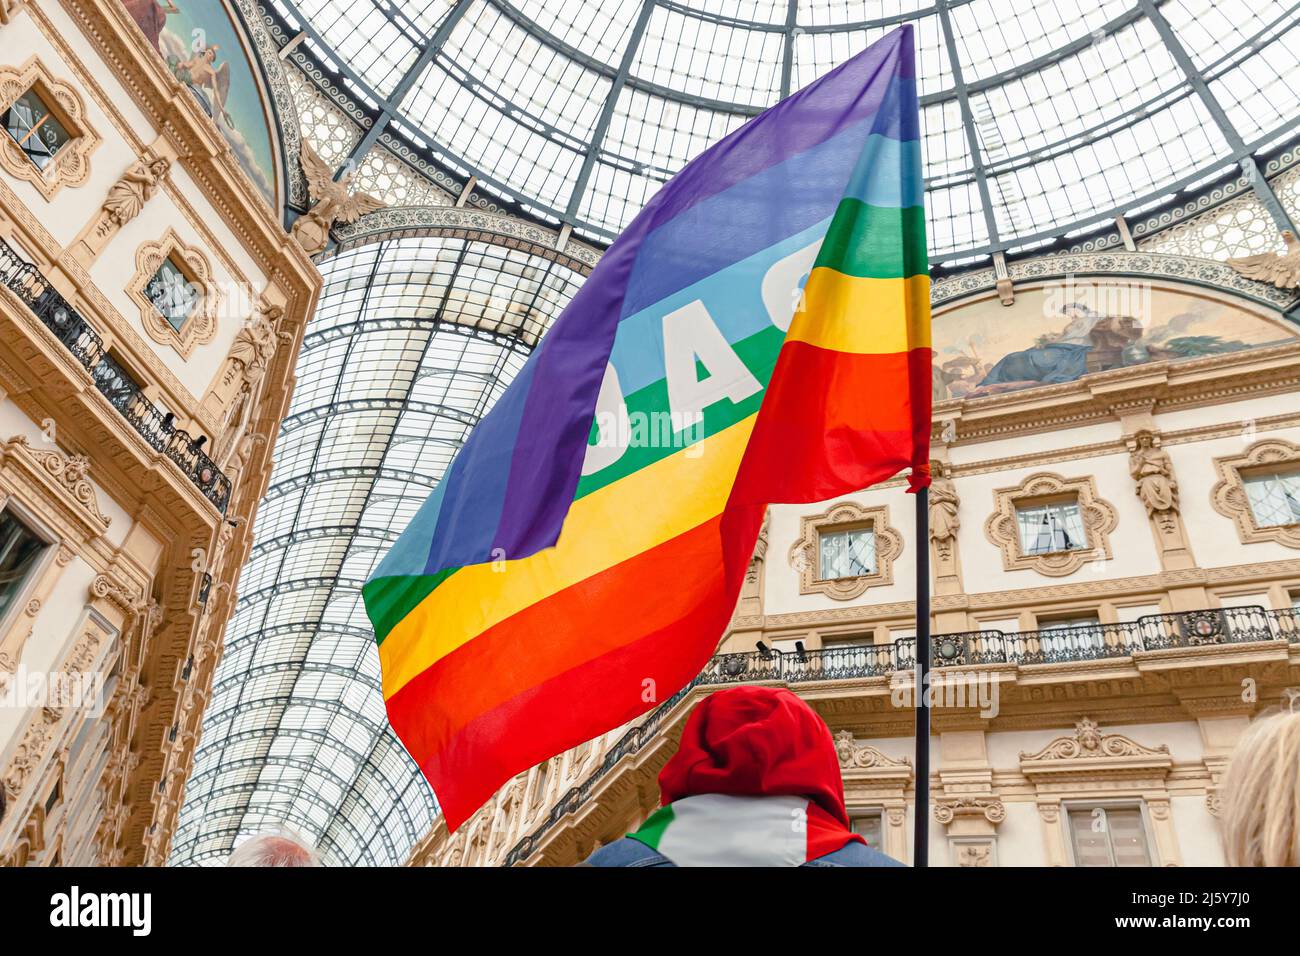 A peace activist holds a rainbow flag during a pacifist demonstration against fascism and the Russia-Ukraine war. Peace flag in Milan, Italy Stock Photo